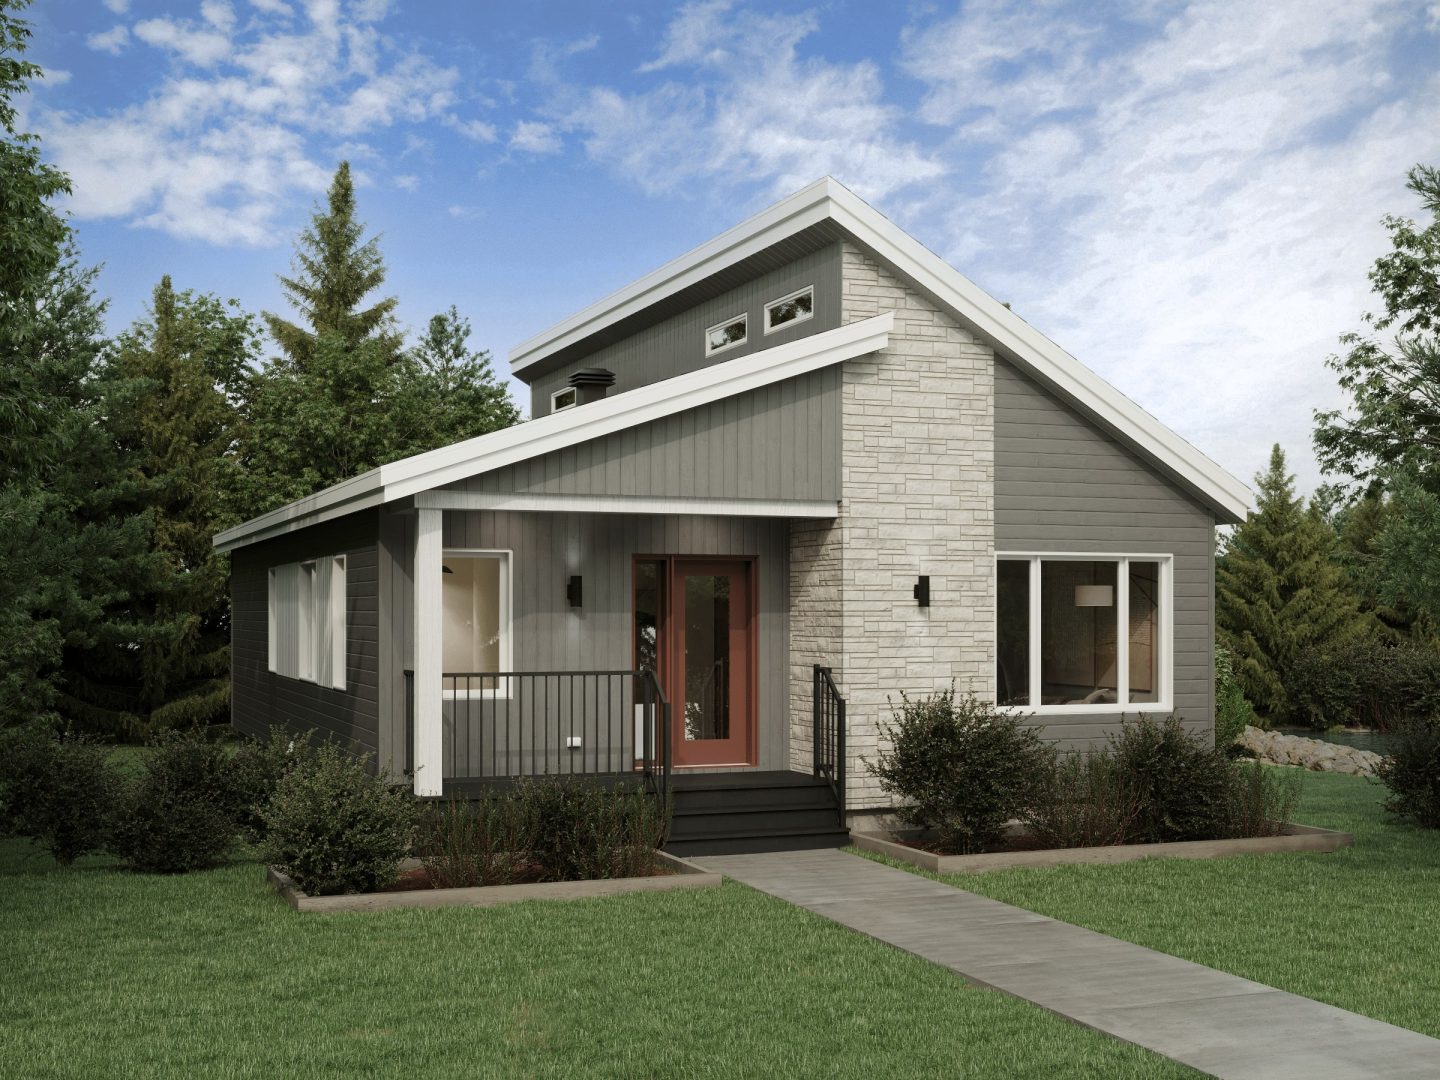 The Svalla model is a midcentury-style chalet. Front exterior view